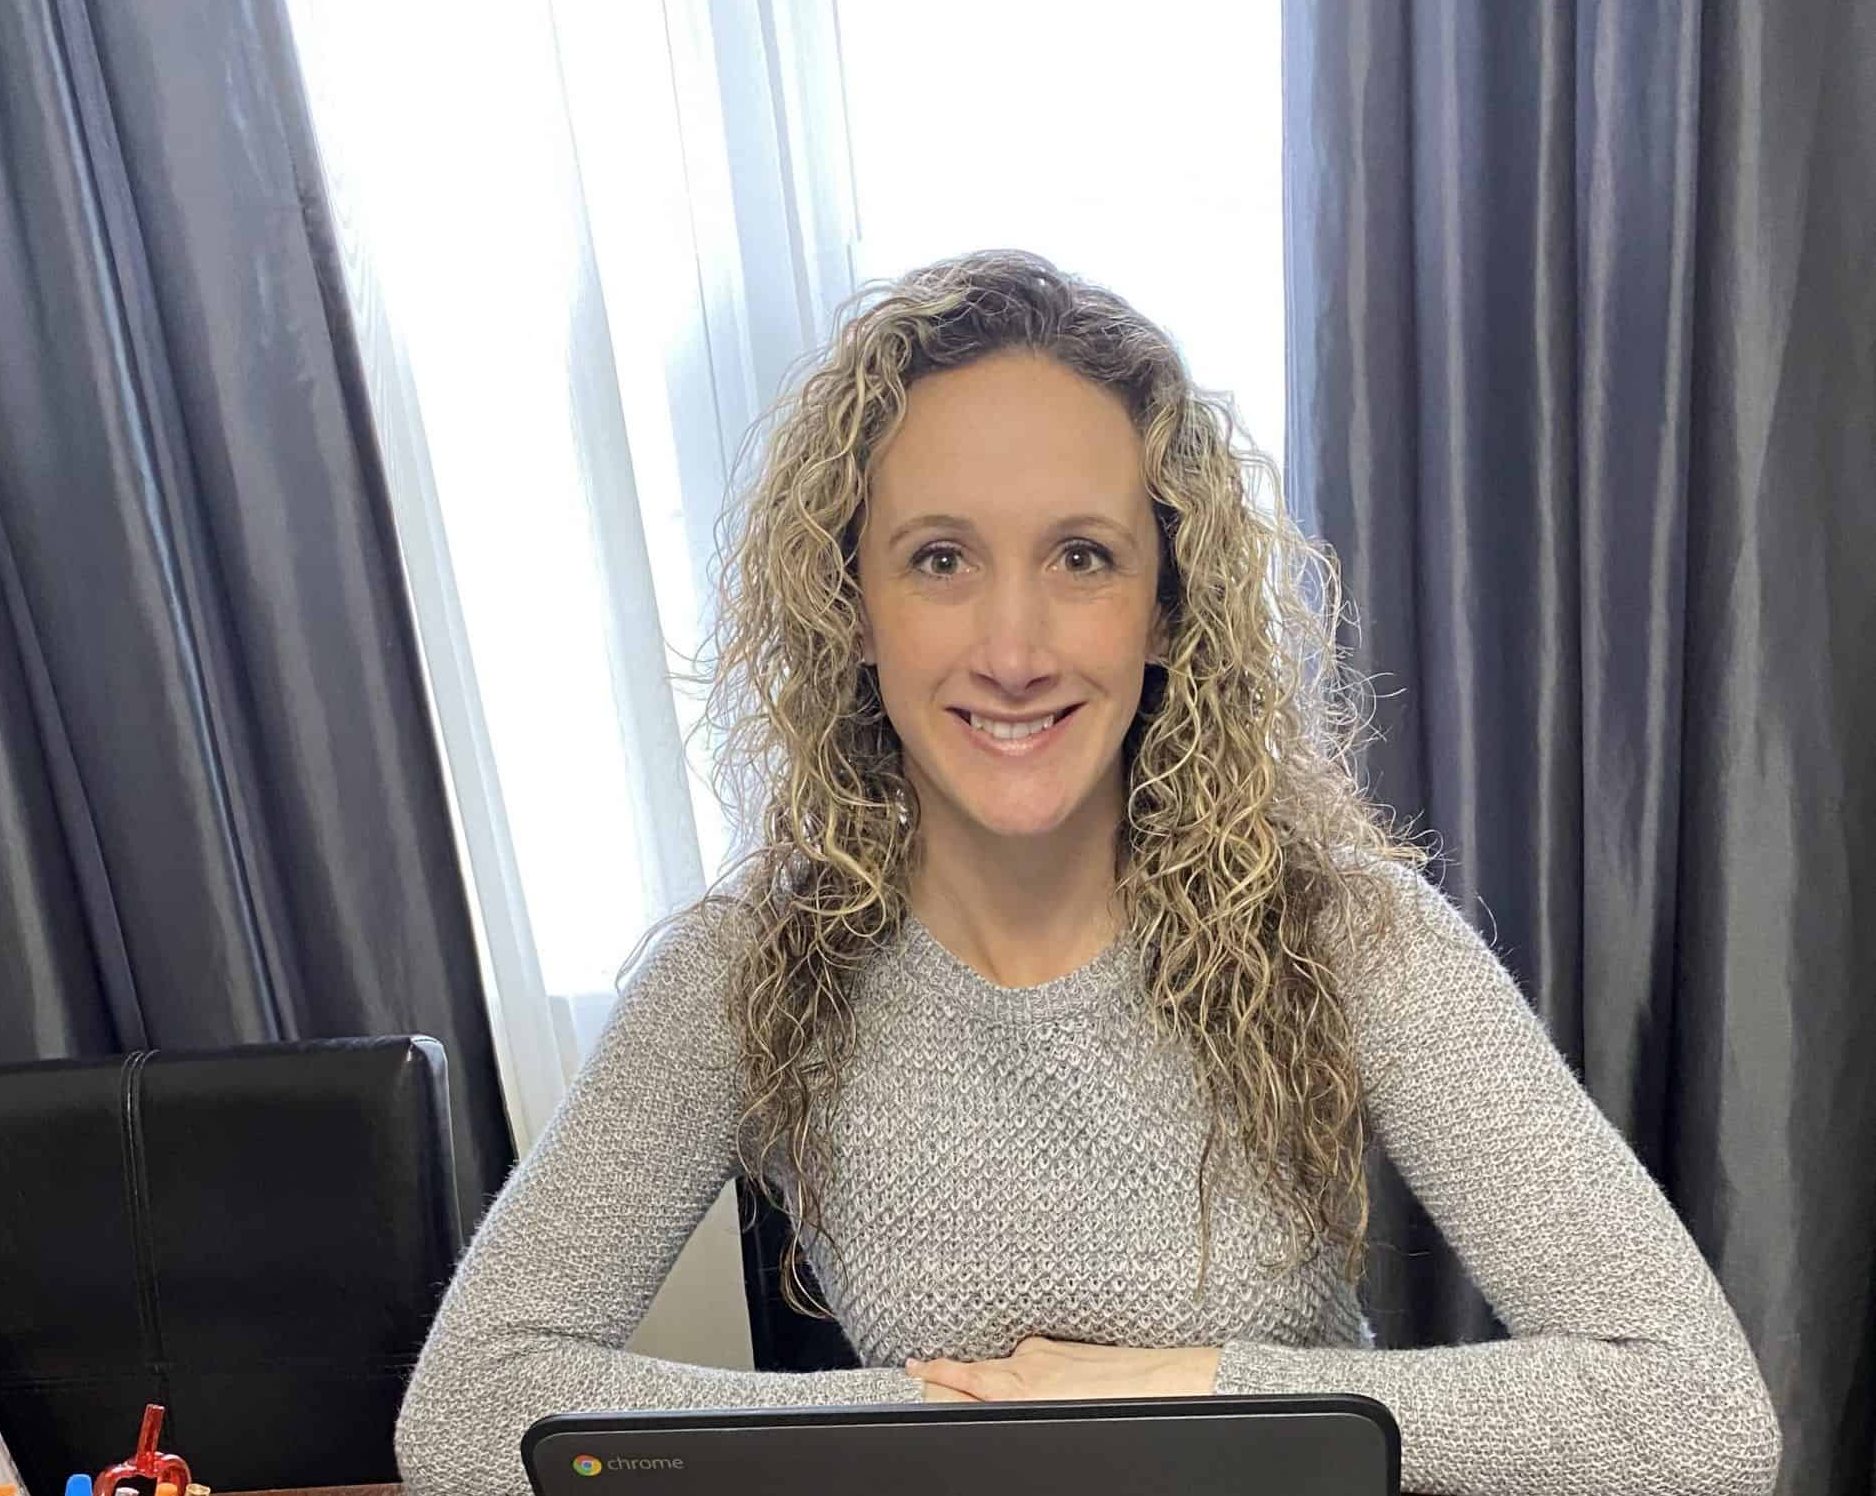 You are currently viewing Milken Award winner Nikki Silva shares tips for connecting with students during remote learning